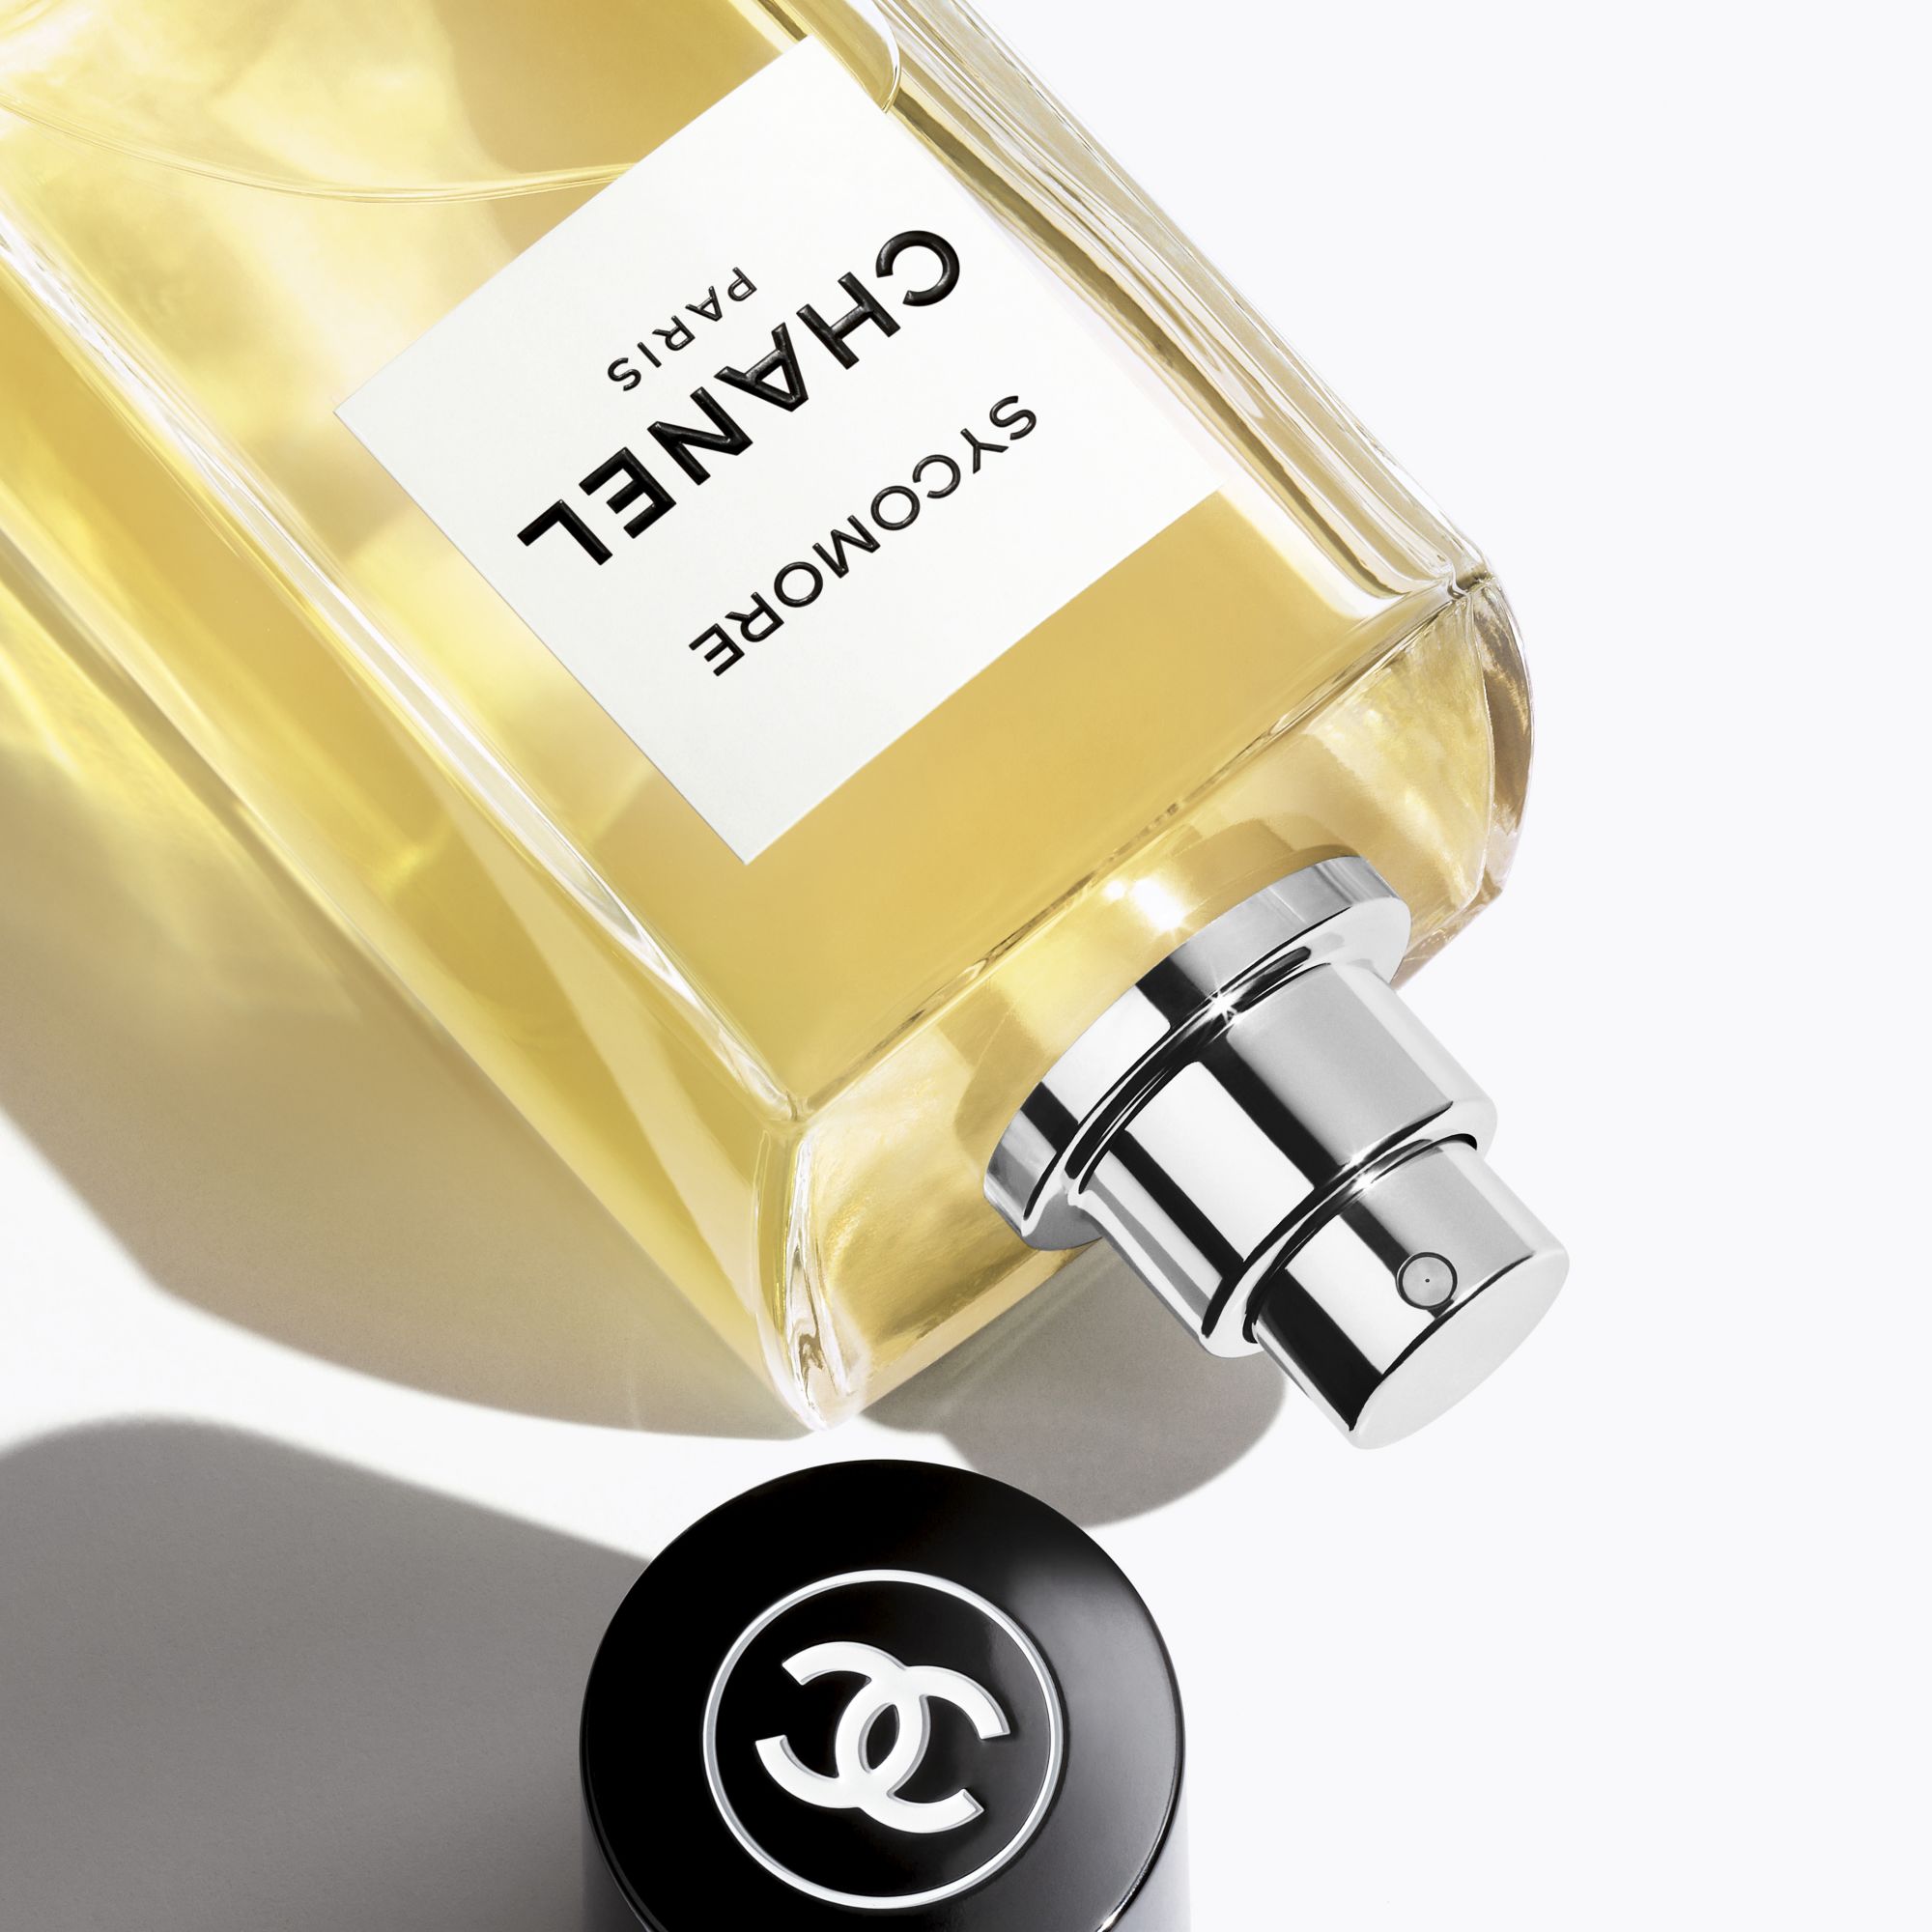 Perfume Shrine: Sycomore by Chanel: fragrance review